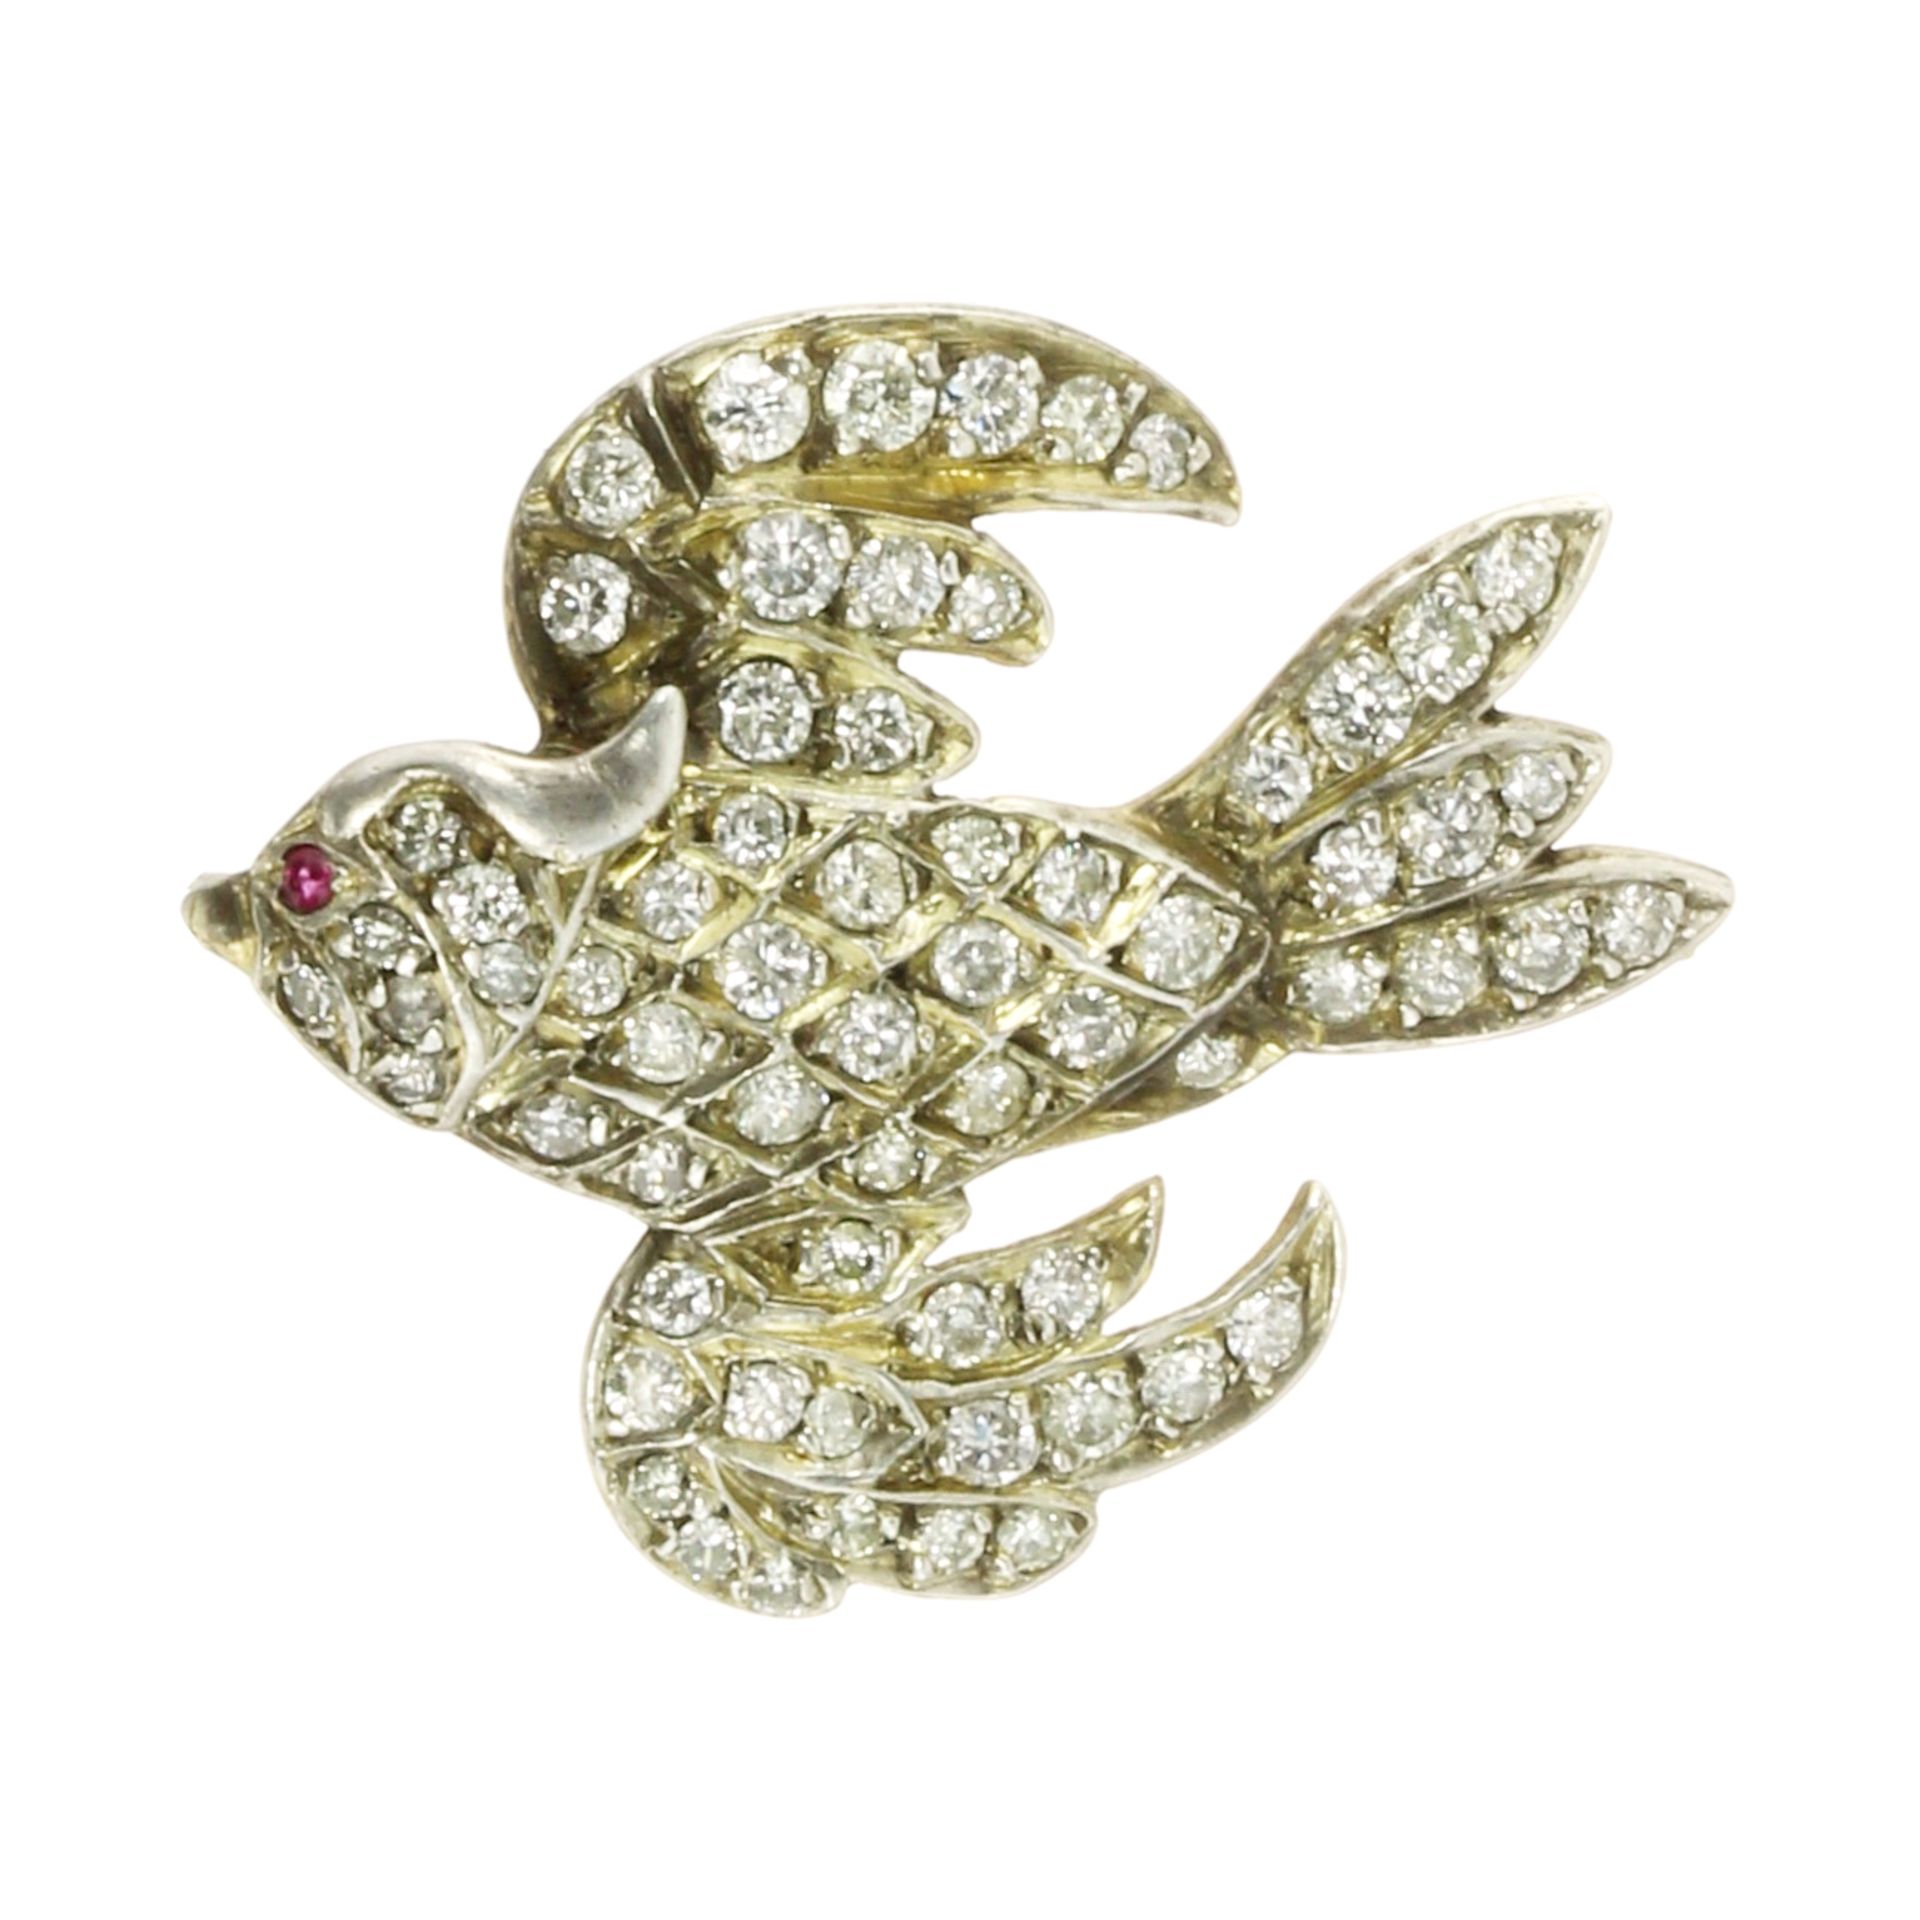 A JEWELLED RUBY AND DIAMOND BIRD BROOCH in yellow gold modeled as a bird in flight, jewelled all